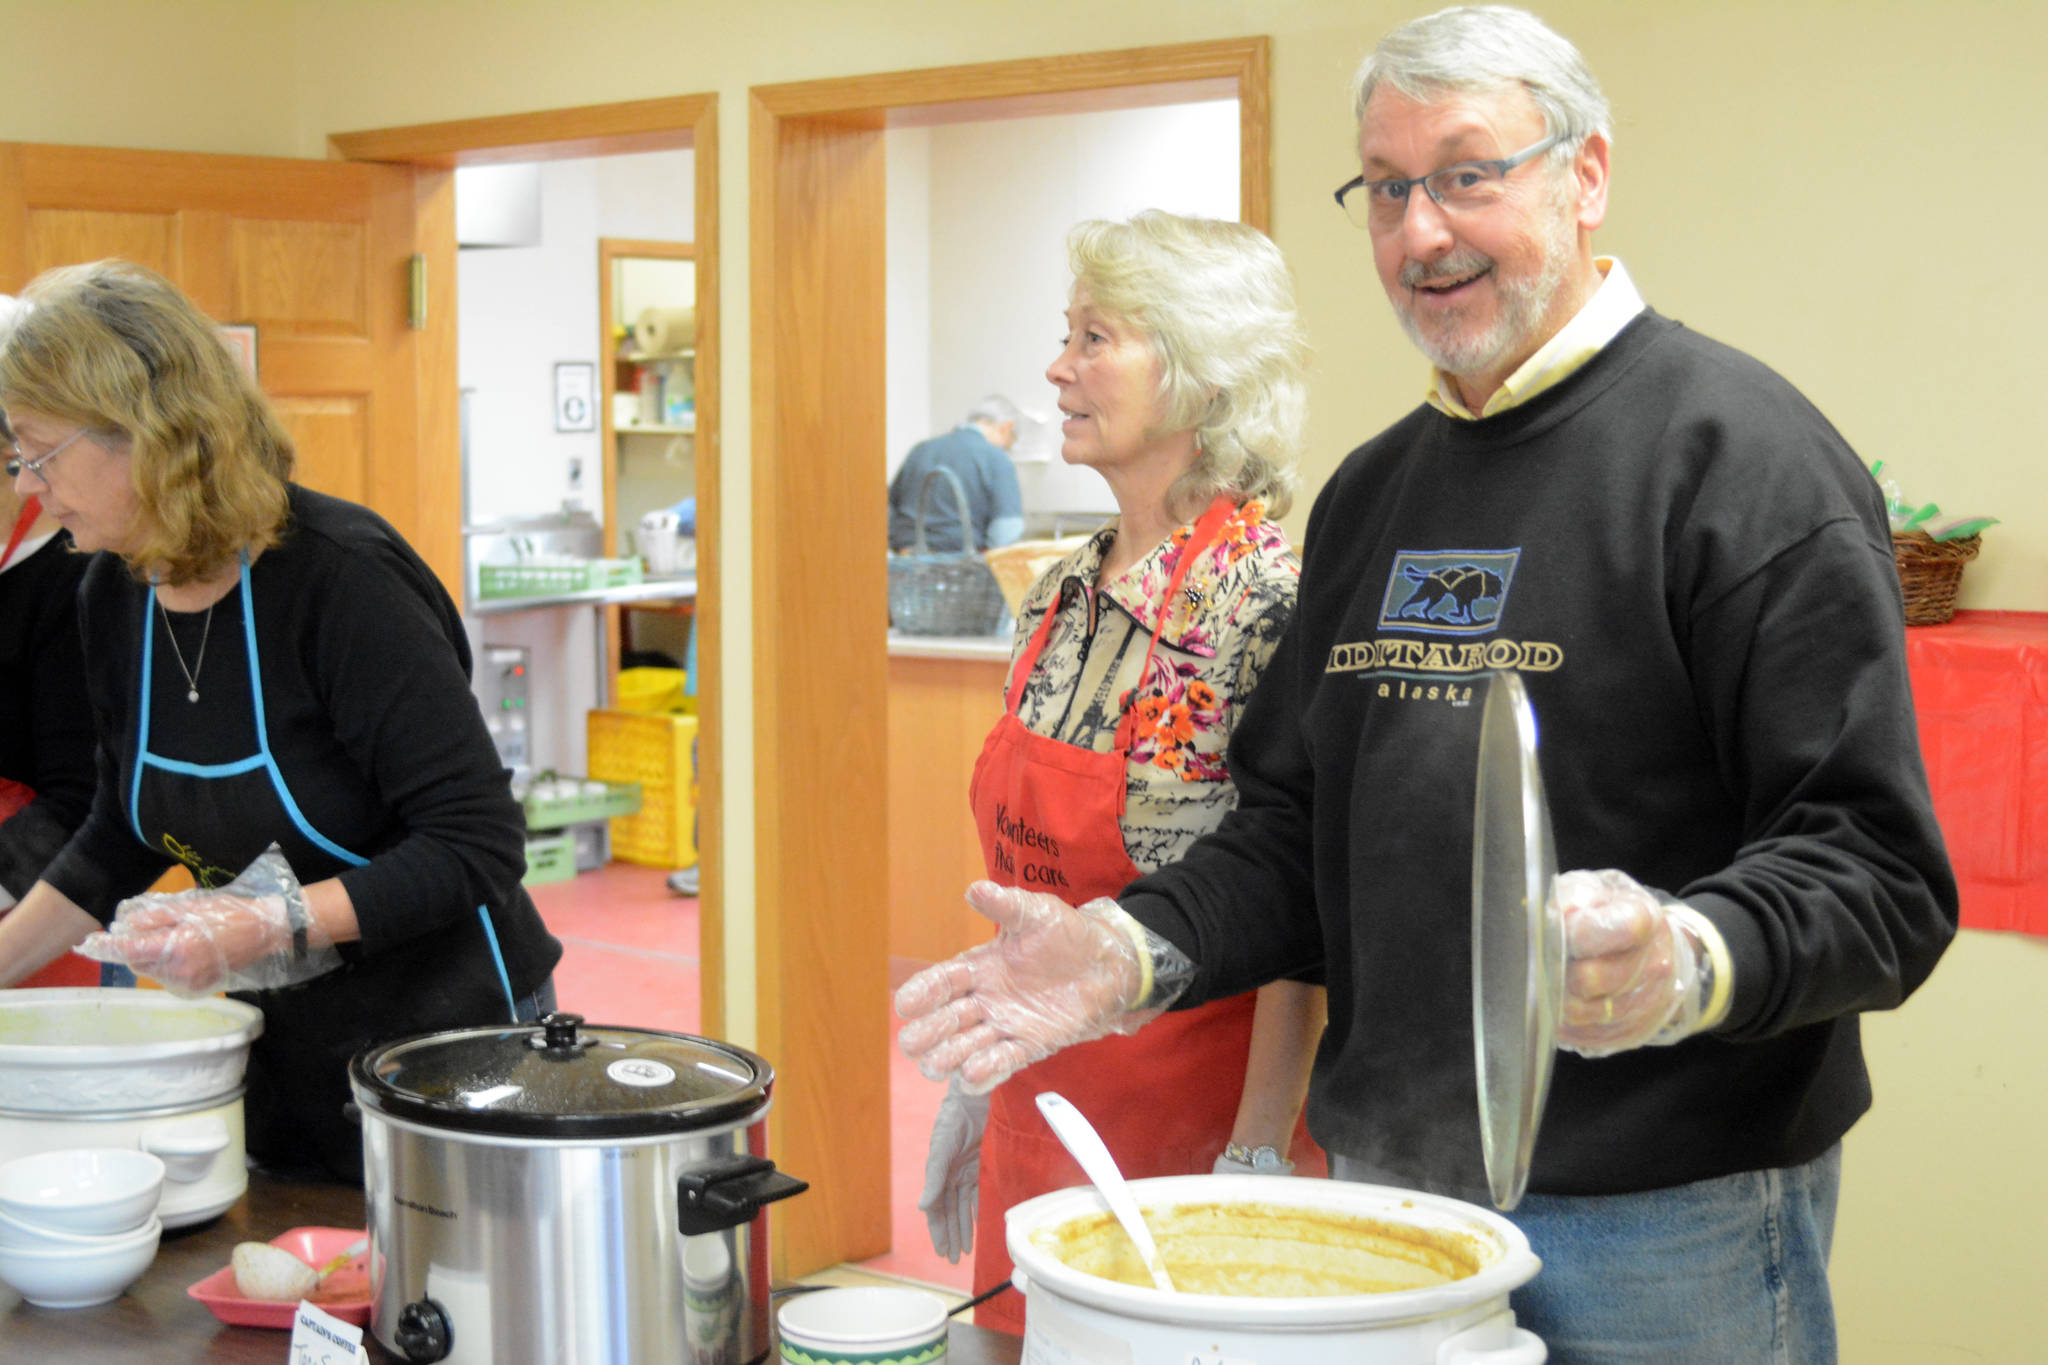 Dennis Weidler, coordinator of the Homer Community Food Pantry, right, serves soup at the Empty Bowls lunch Friday, Nov. 9, 2018, at Homer United Methodist Church in Homer, Alaska. Helping him are Deb Schmidt, center, and Karen Murdock, far left. More than 15 potters donated ceramic bowls for the annual fundraiser for the food pantry. (Photo by Michael Armstrong/Homer News)